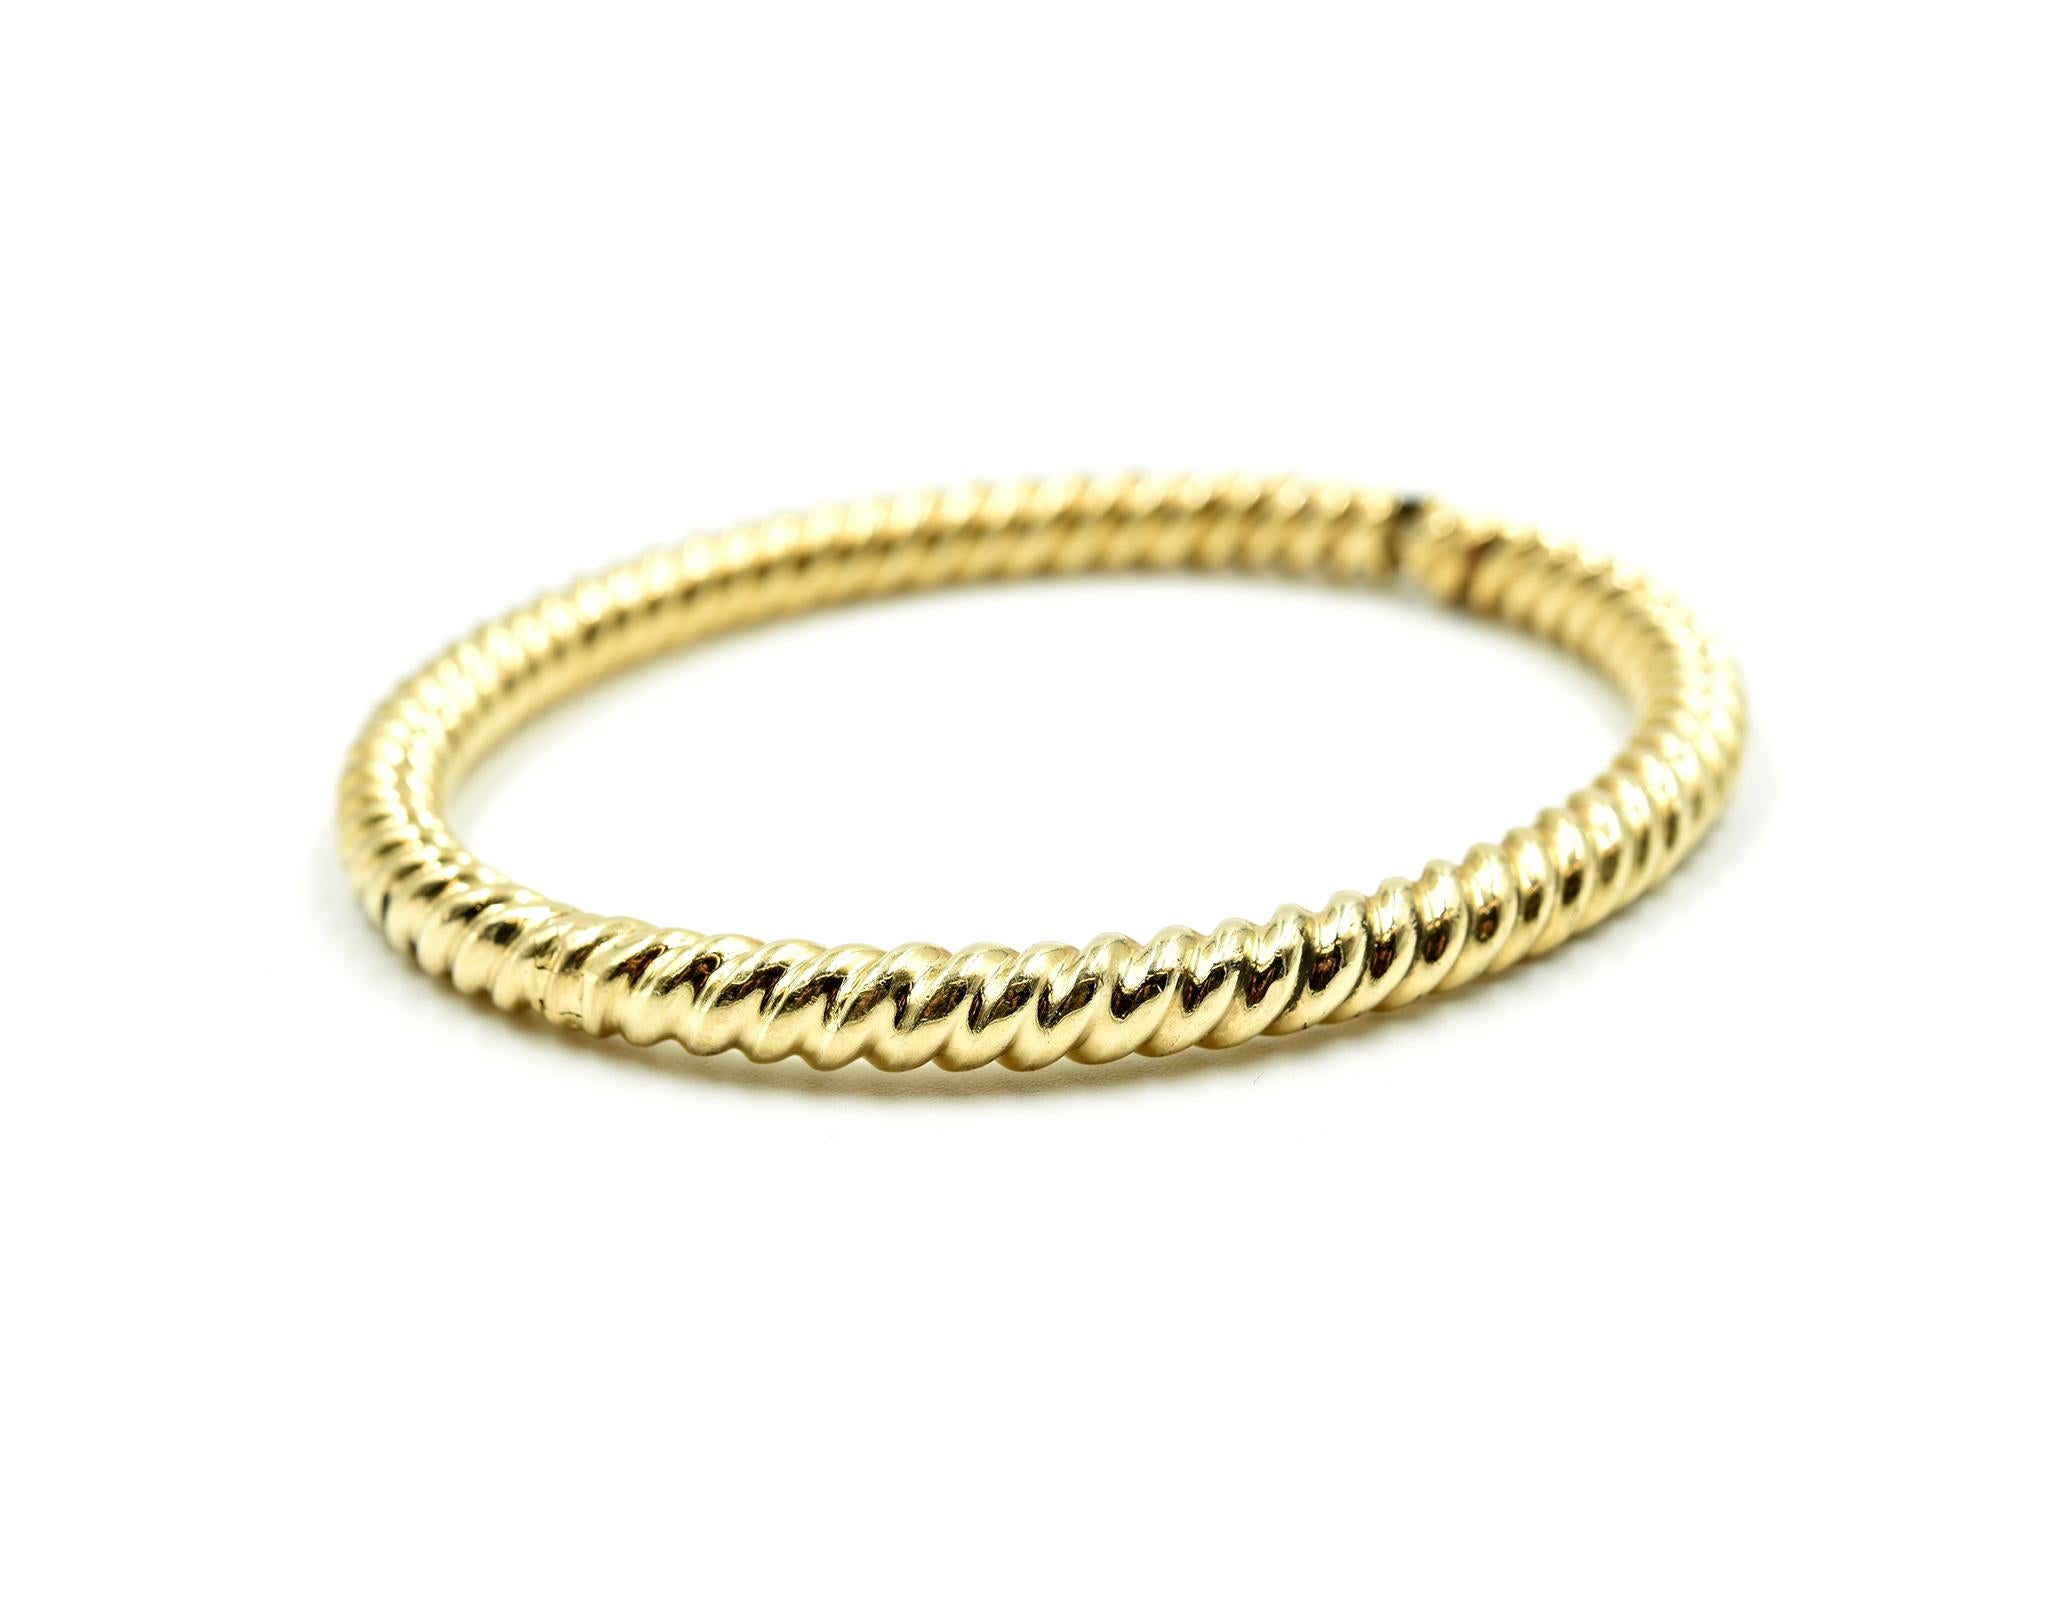 Designer: custom design
Material: 14k yellow gold
Dimensions: bangle will fit 7-inch wrist and the bangle is 1/4 inches wide
Weight: 17.58 grams
